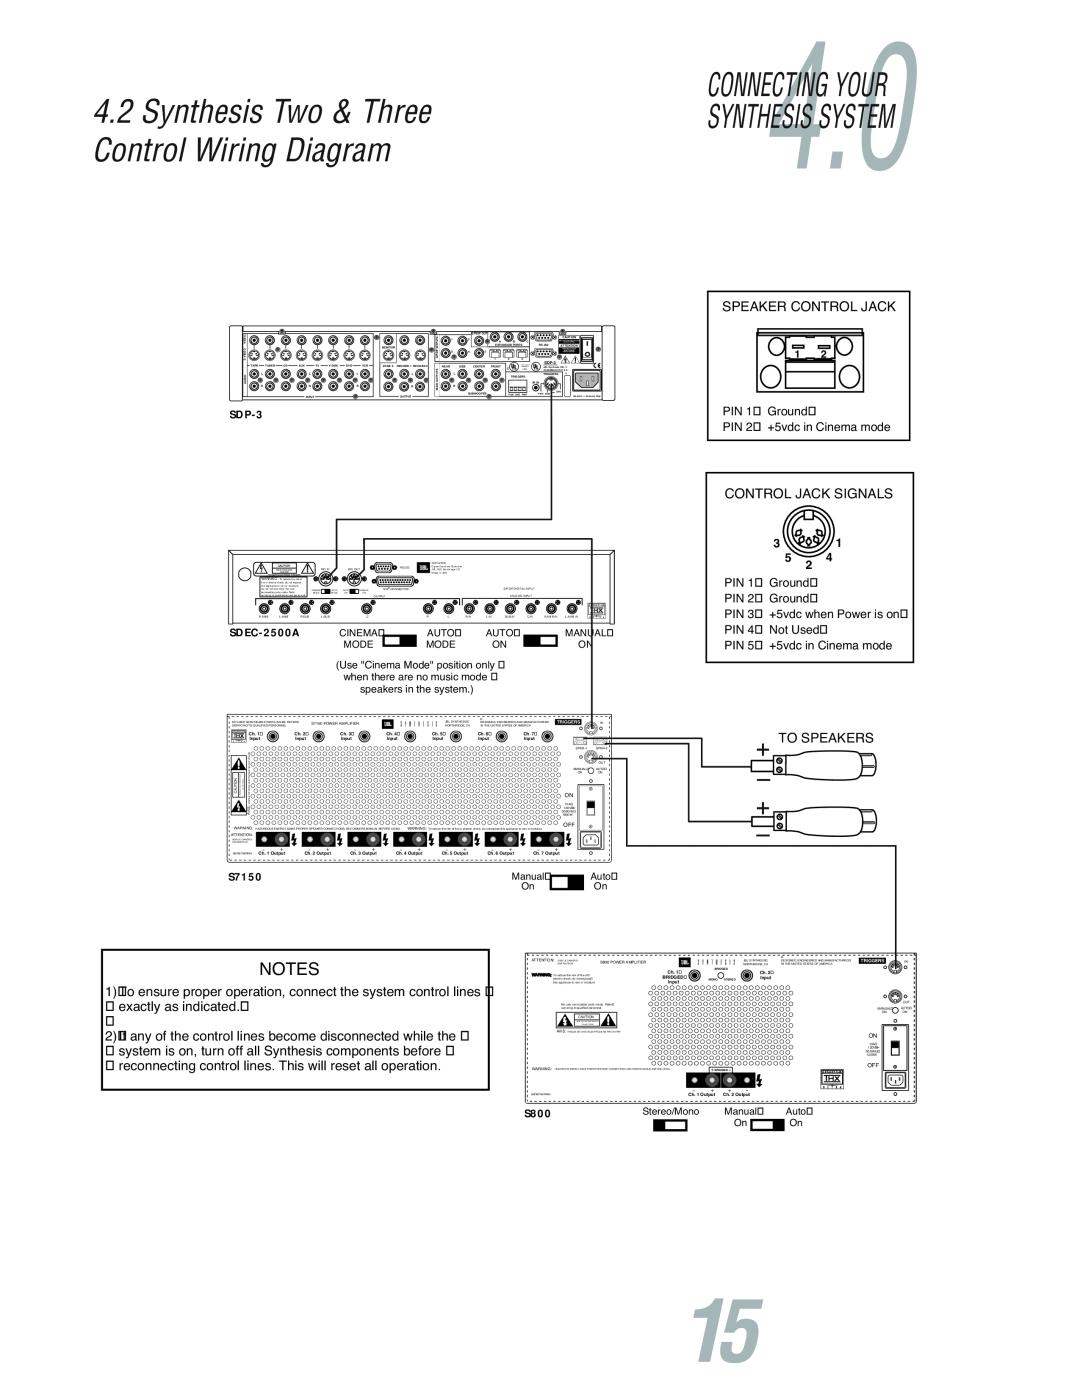 JBL S7150 Synthesis Two & ThreeSYNTHESIS SYSTEM, Control Wiring Diagram, CONNECTING4.YOUR0, Speaker Control Jack 